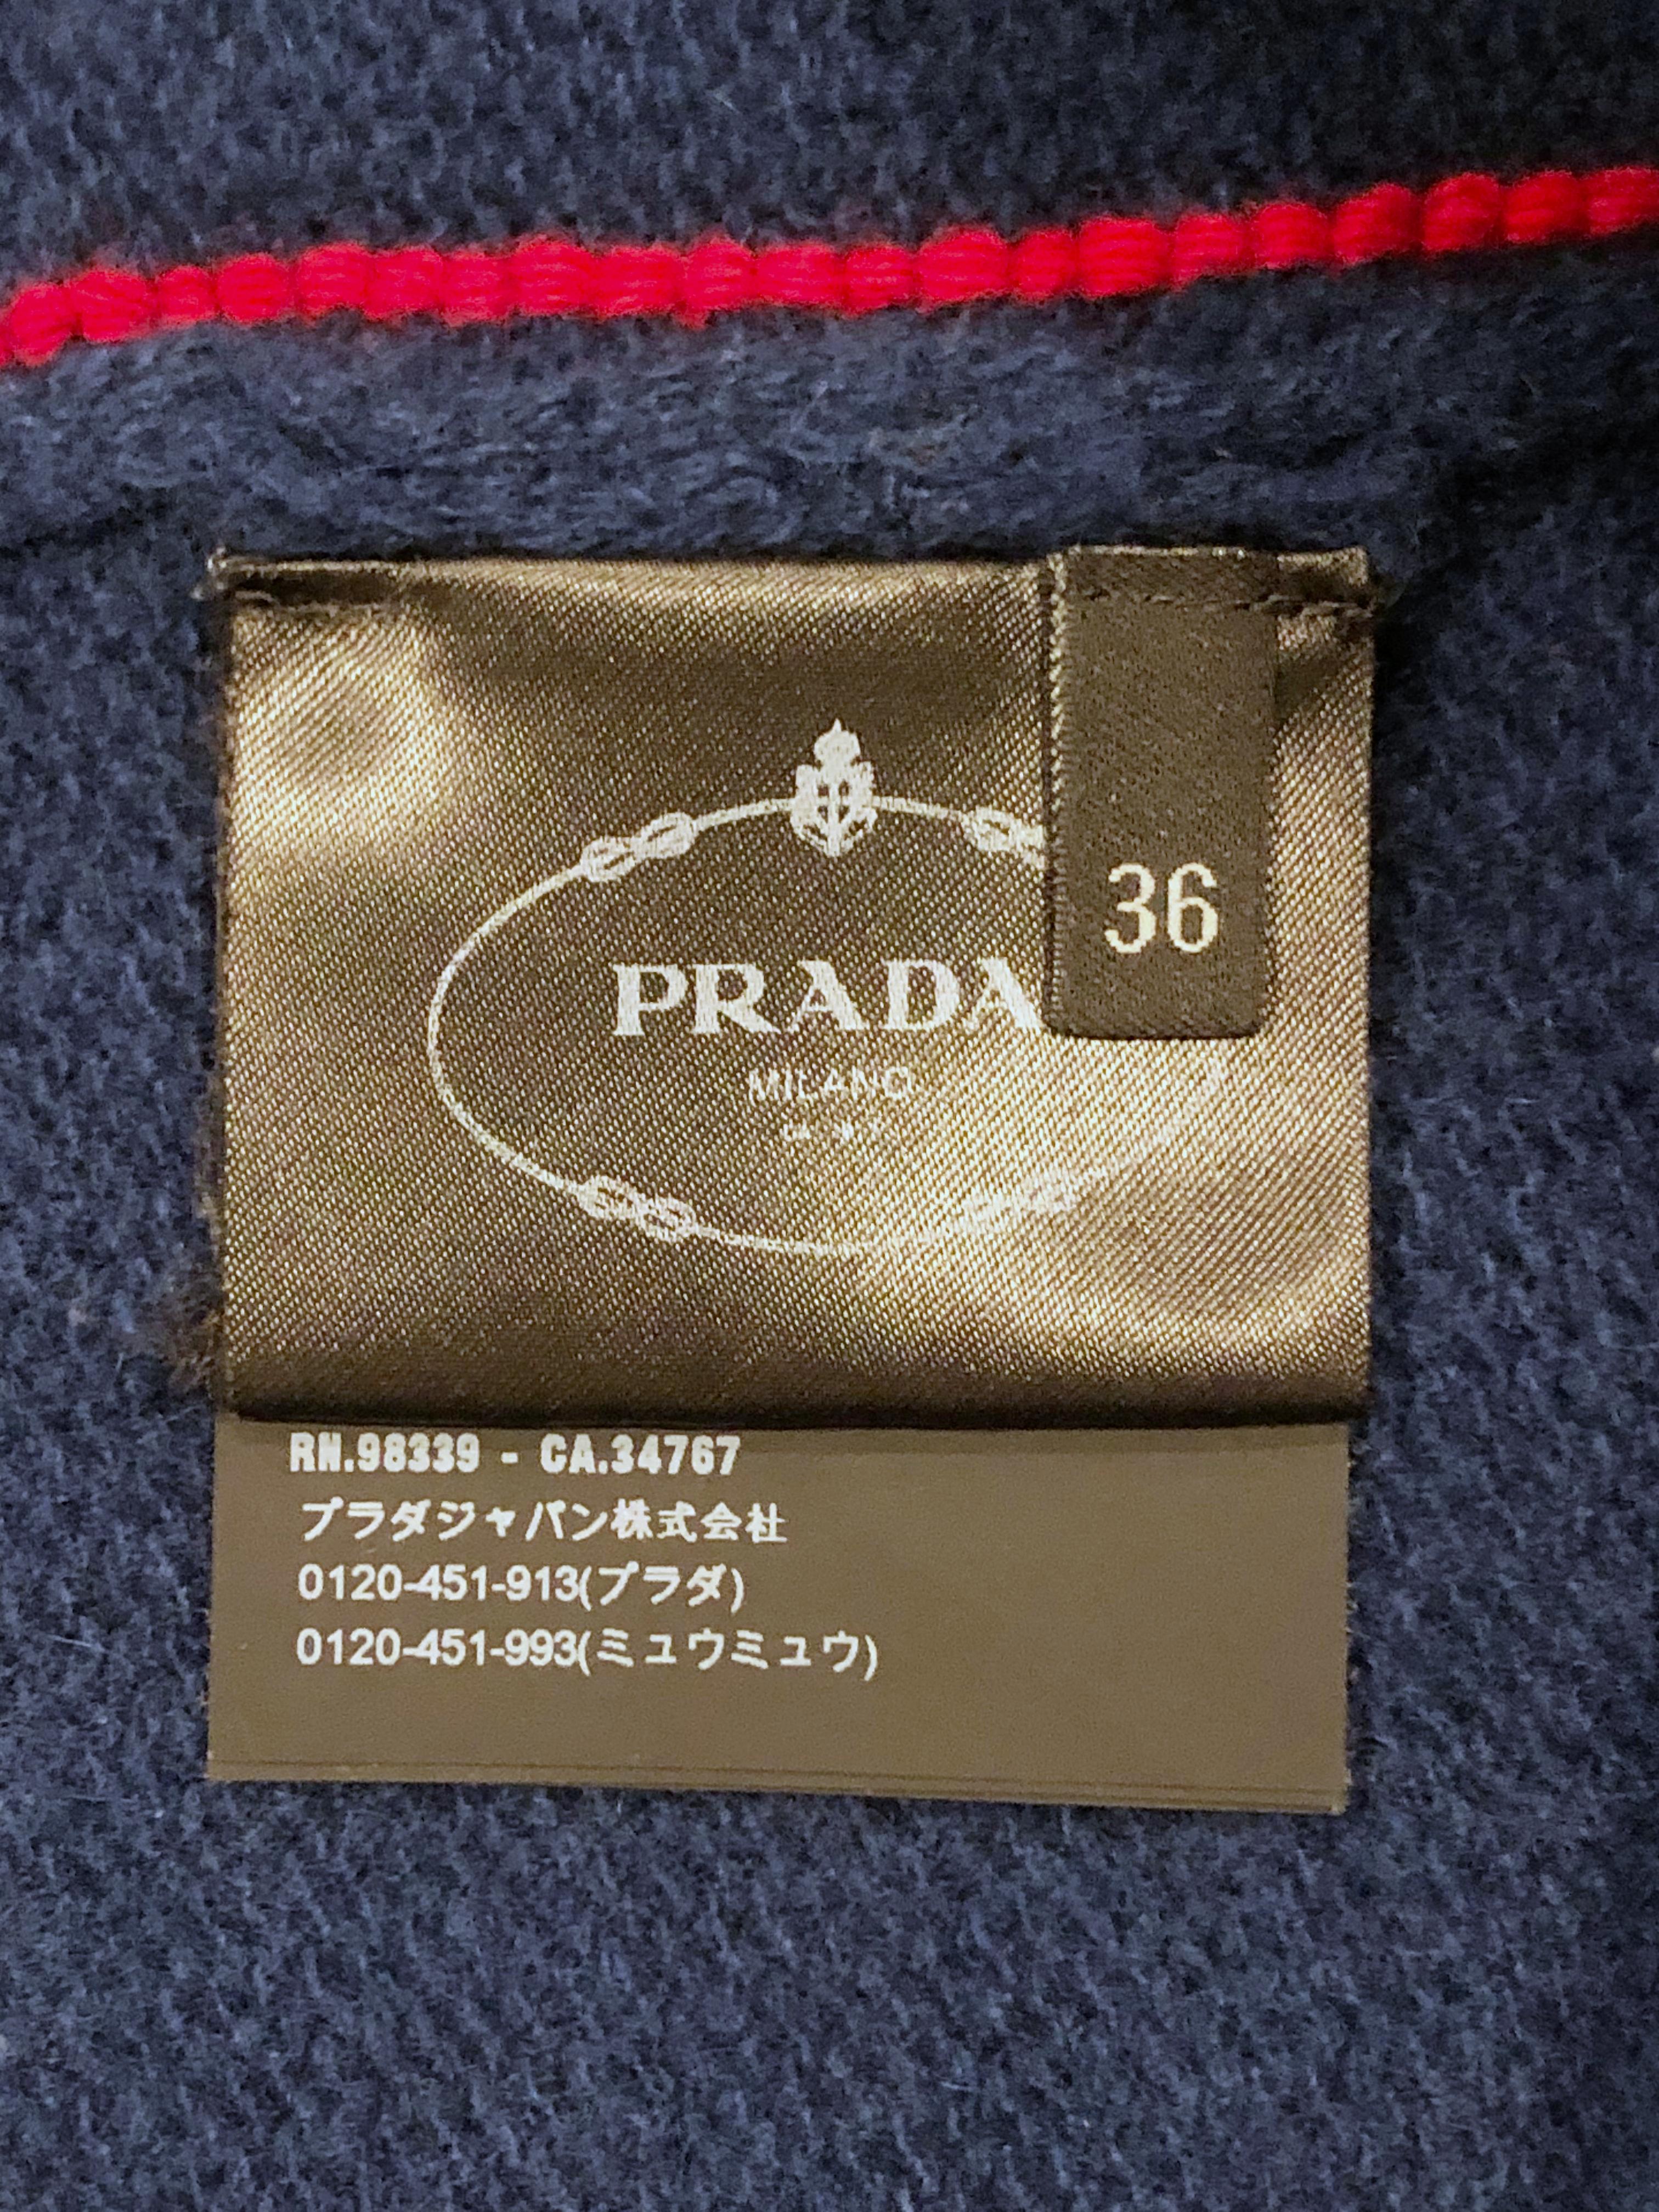 Women's PRADA Navy Cashmere Turtleneck with Red Piping Details For Sale